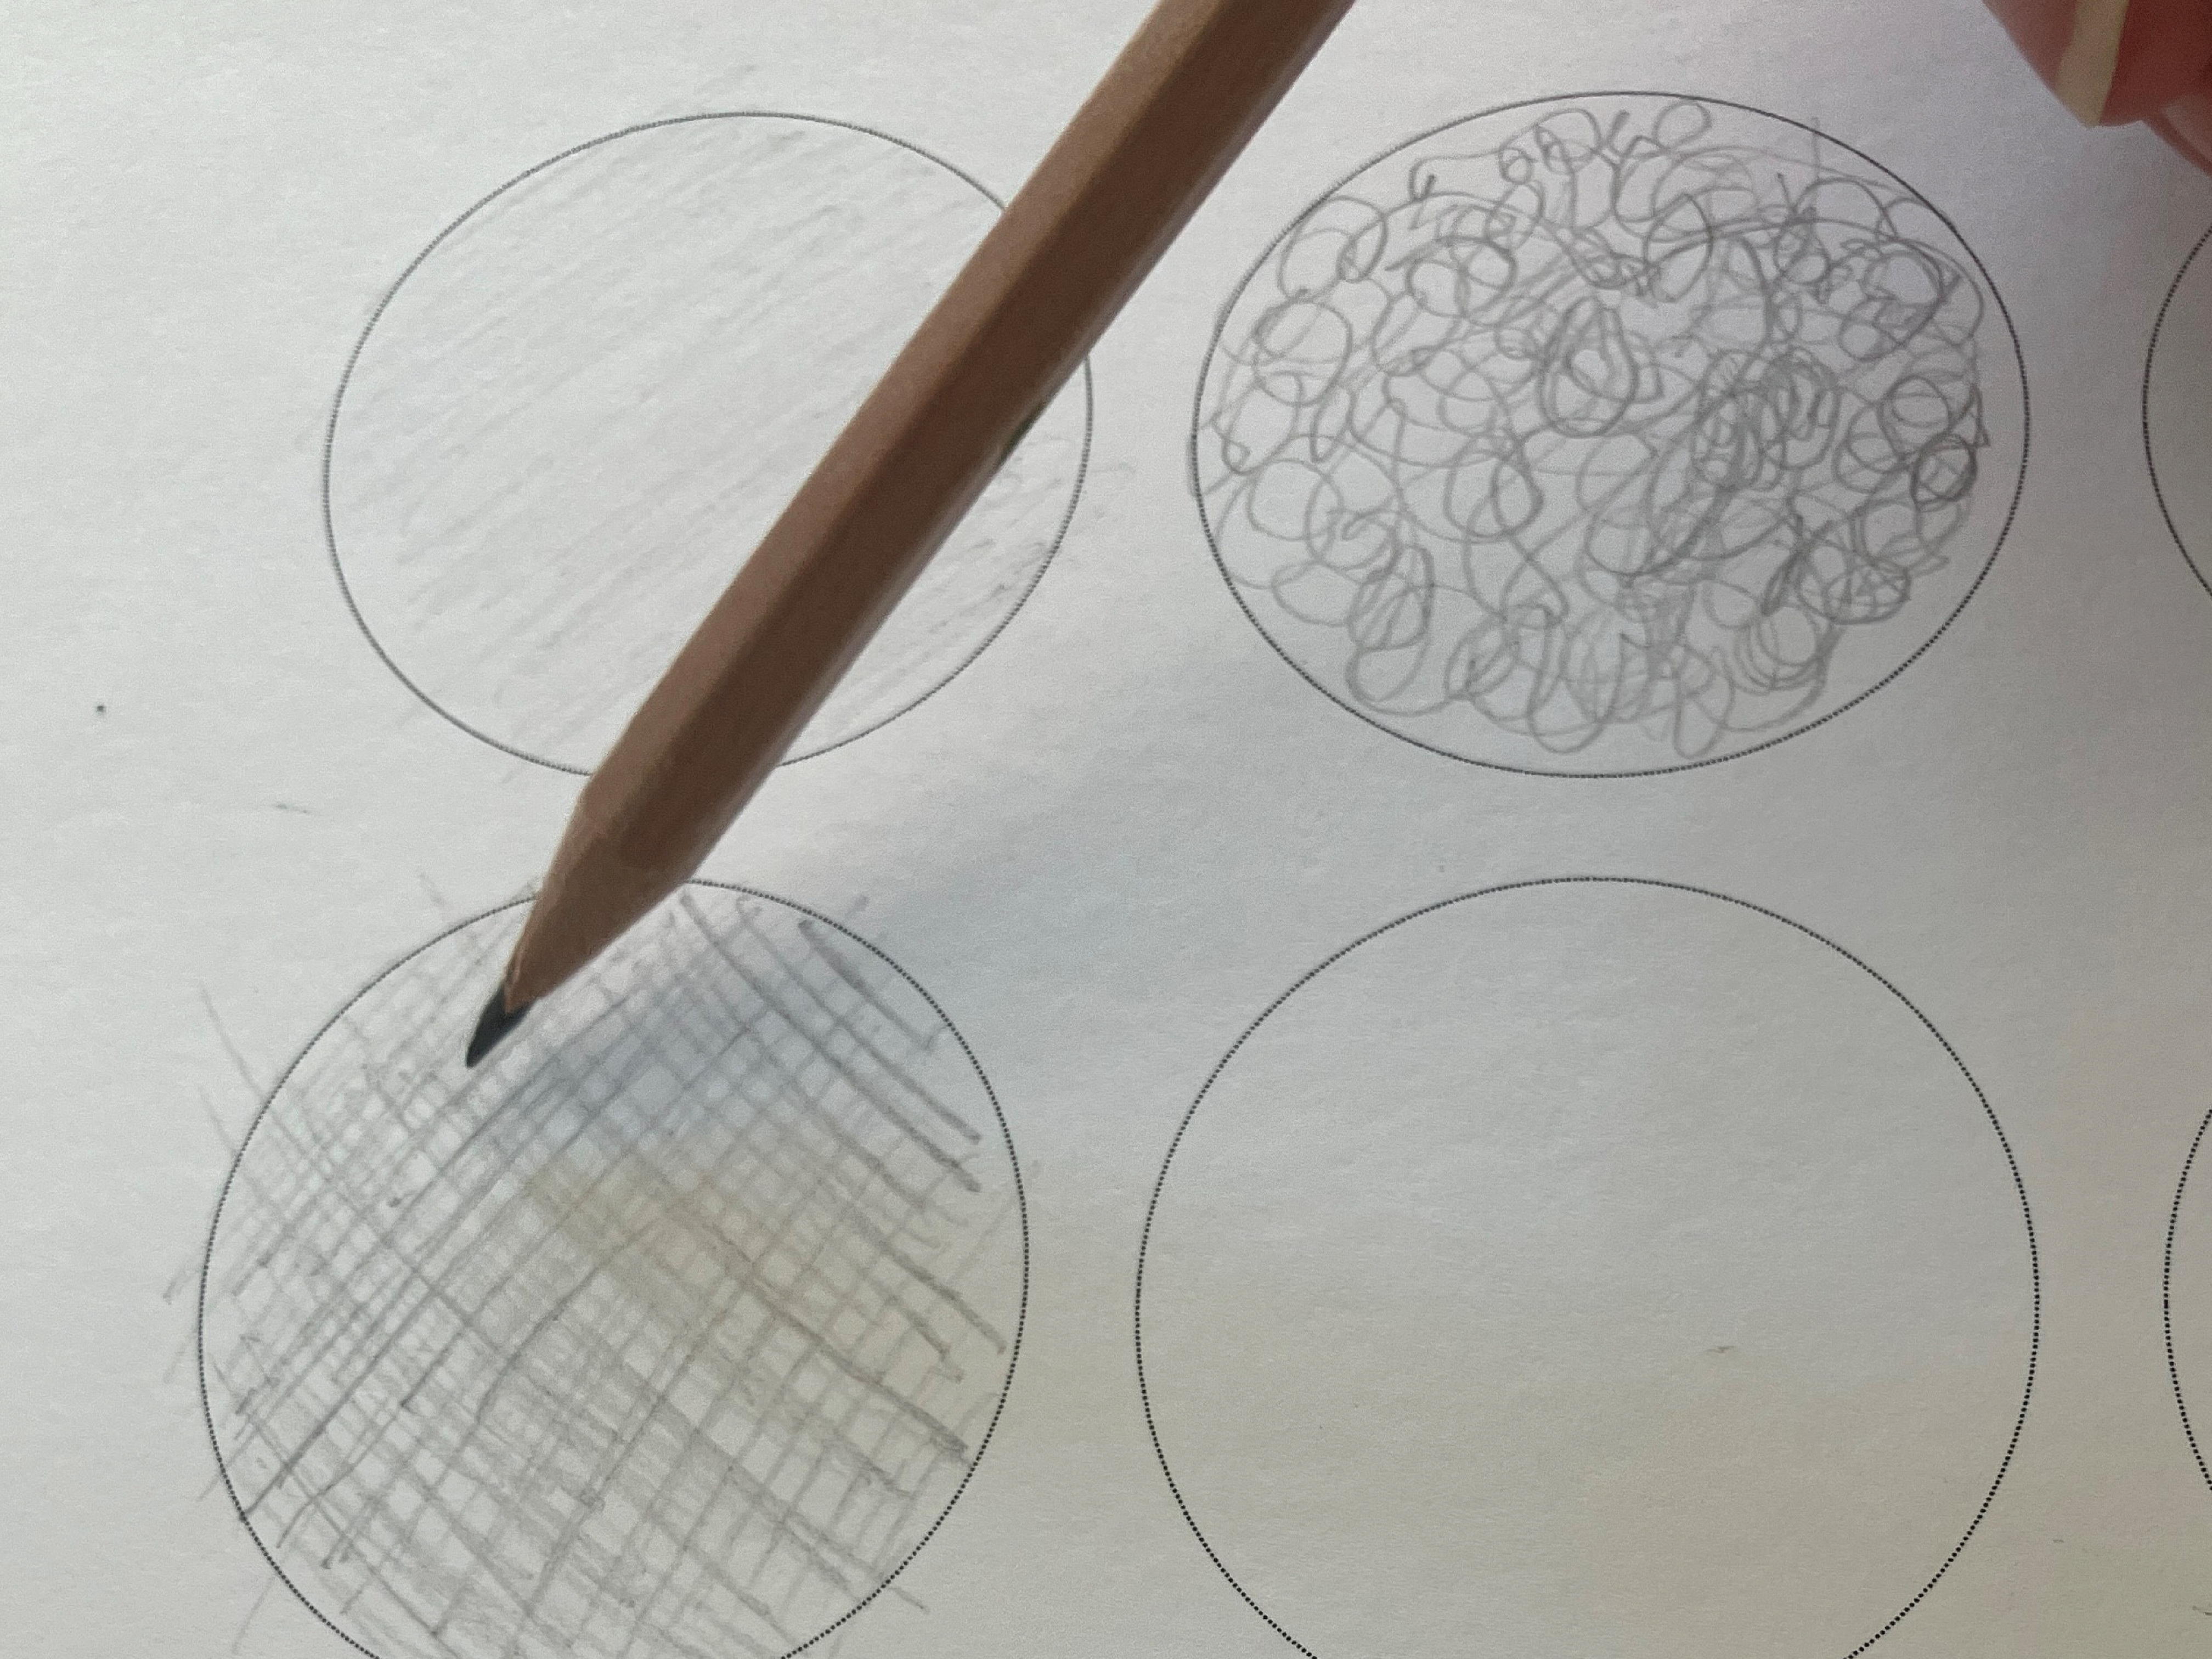 A wooden pencil using different textures to fill in circle outlines.